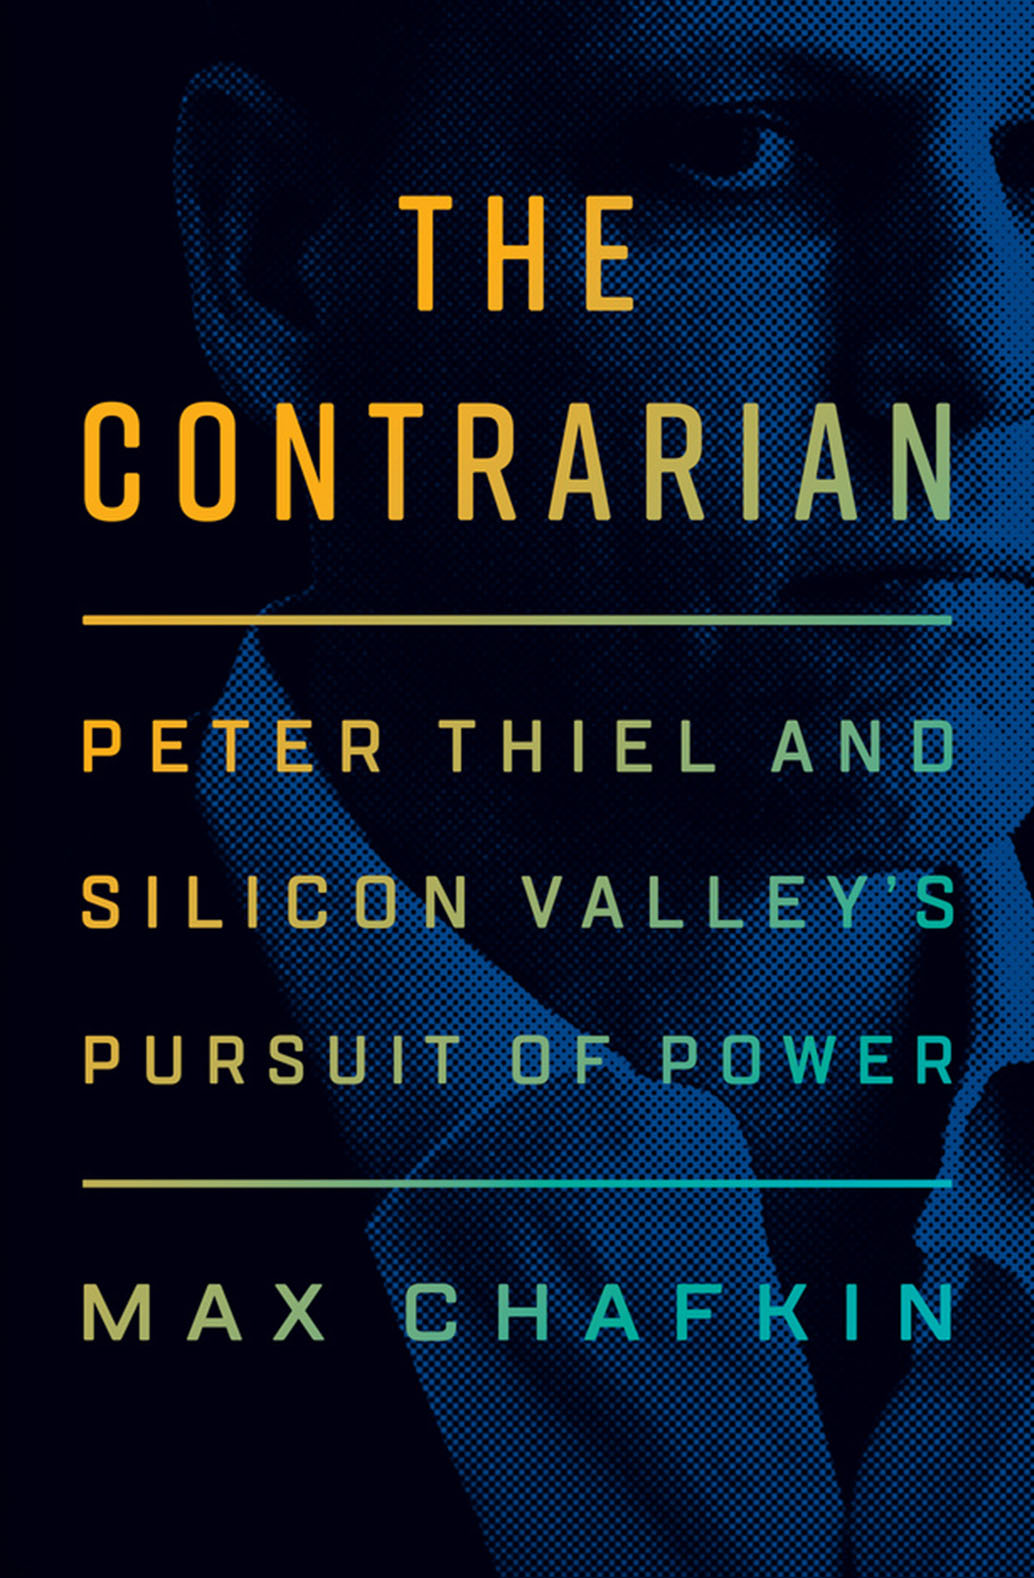 TheContrarian